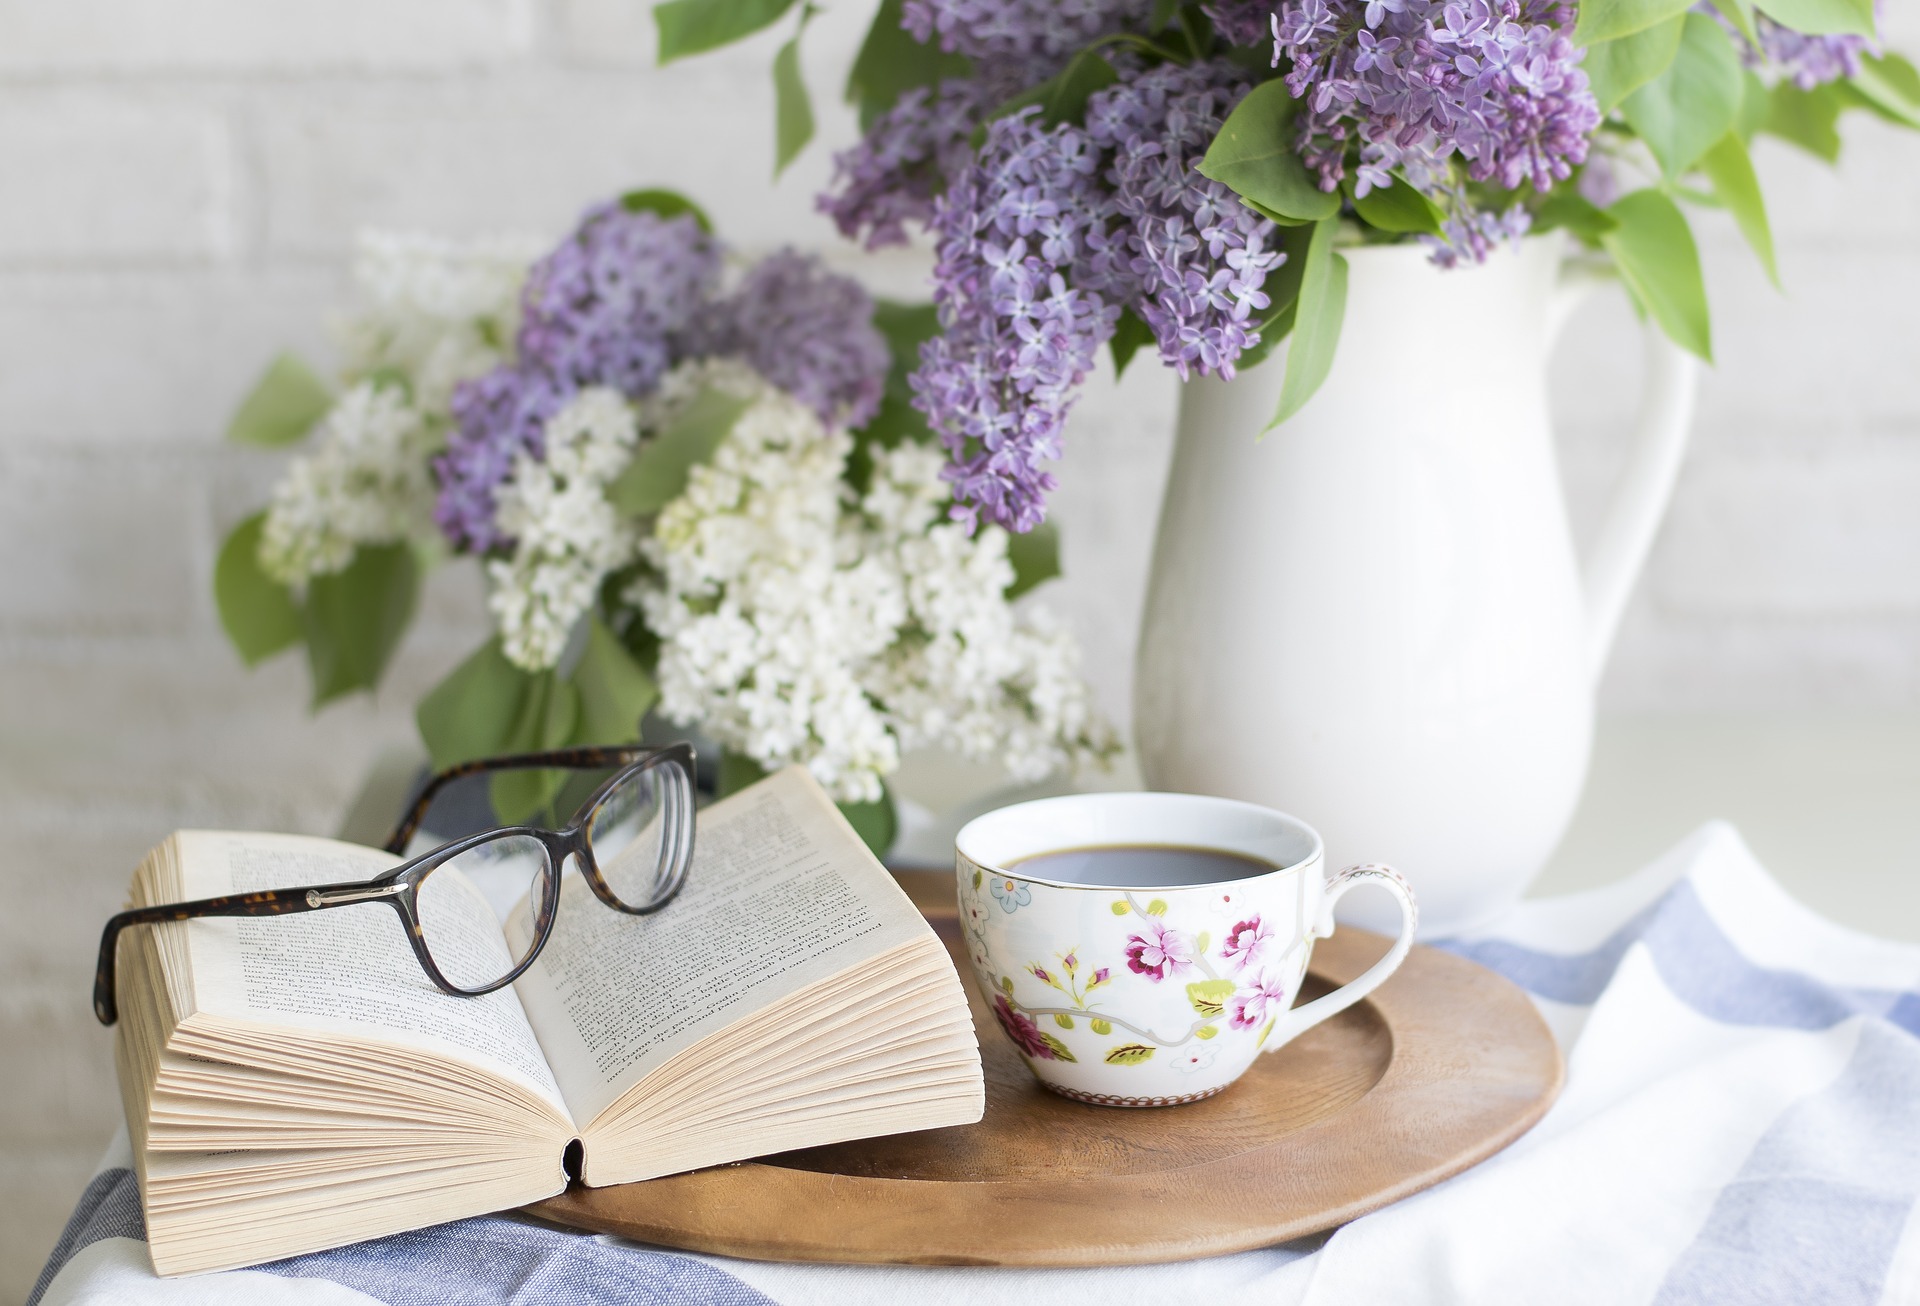 an open book with glasses on top and a white cup of coffee with a white vase with purple flowers